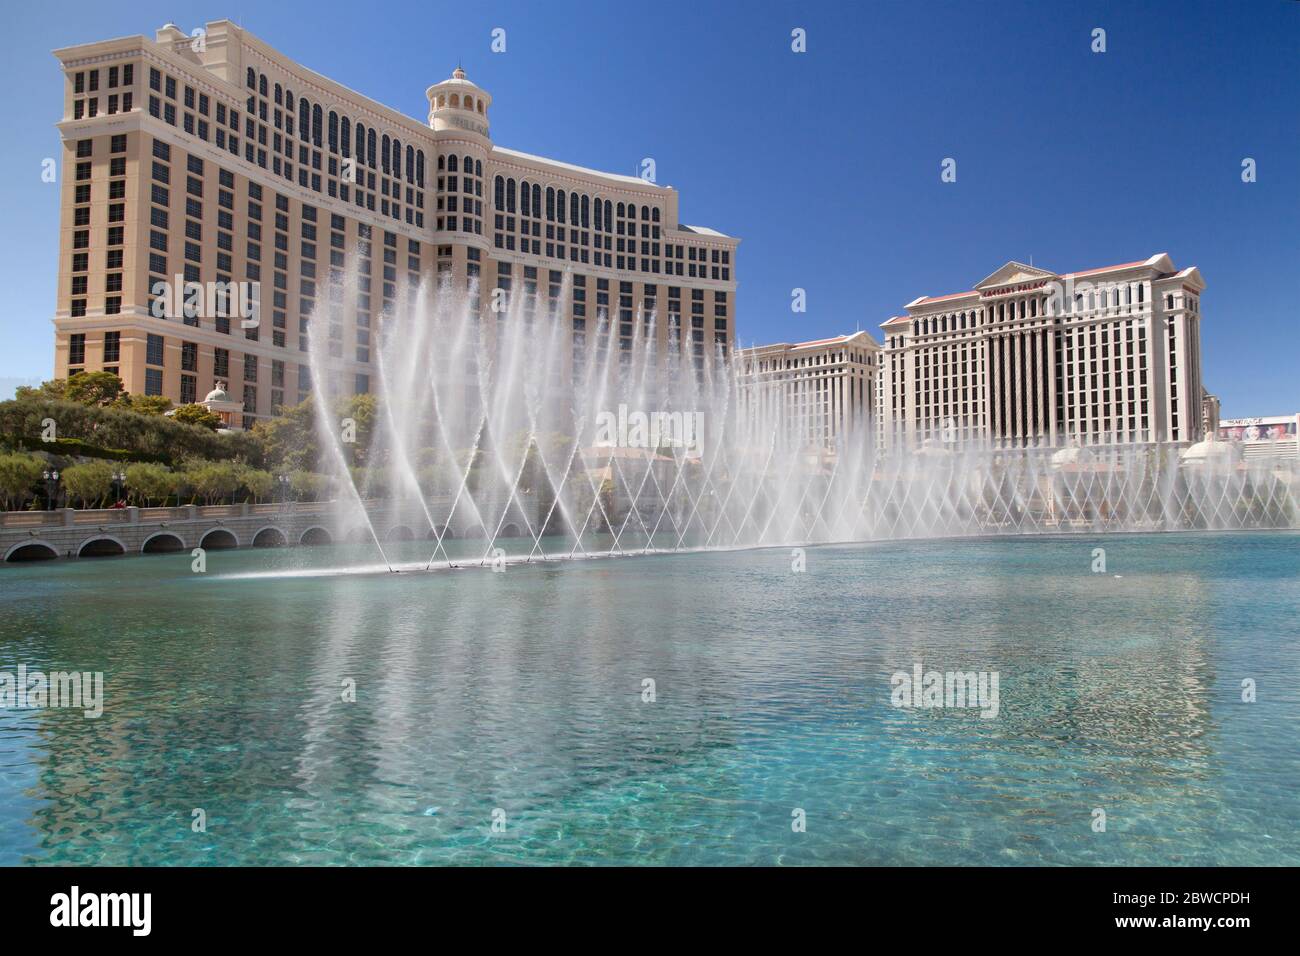 Las Vegas, Nevada - August 30, 2019: The Bellagio and nearby Caesars Palace, with the fountains of Bellagio in the foreground, Las Vegas, Nevada, Unit Stock Photo